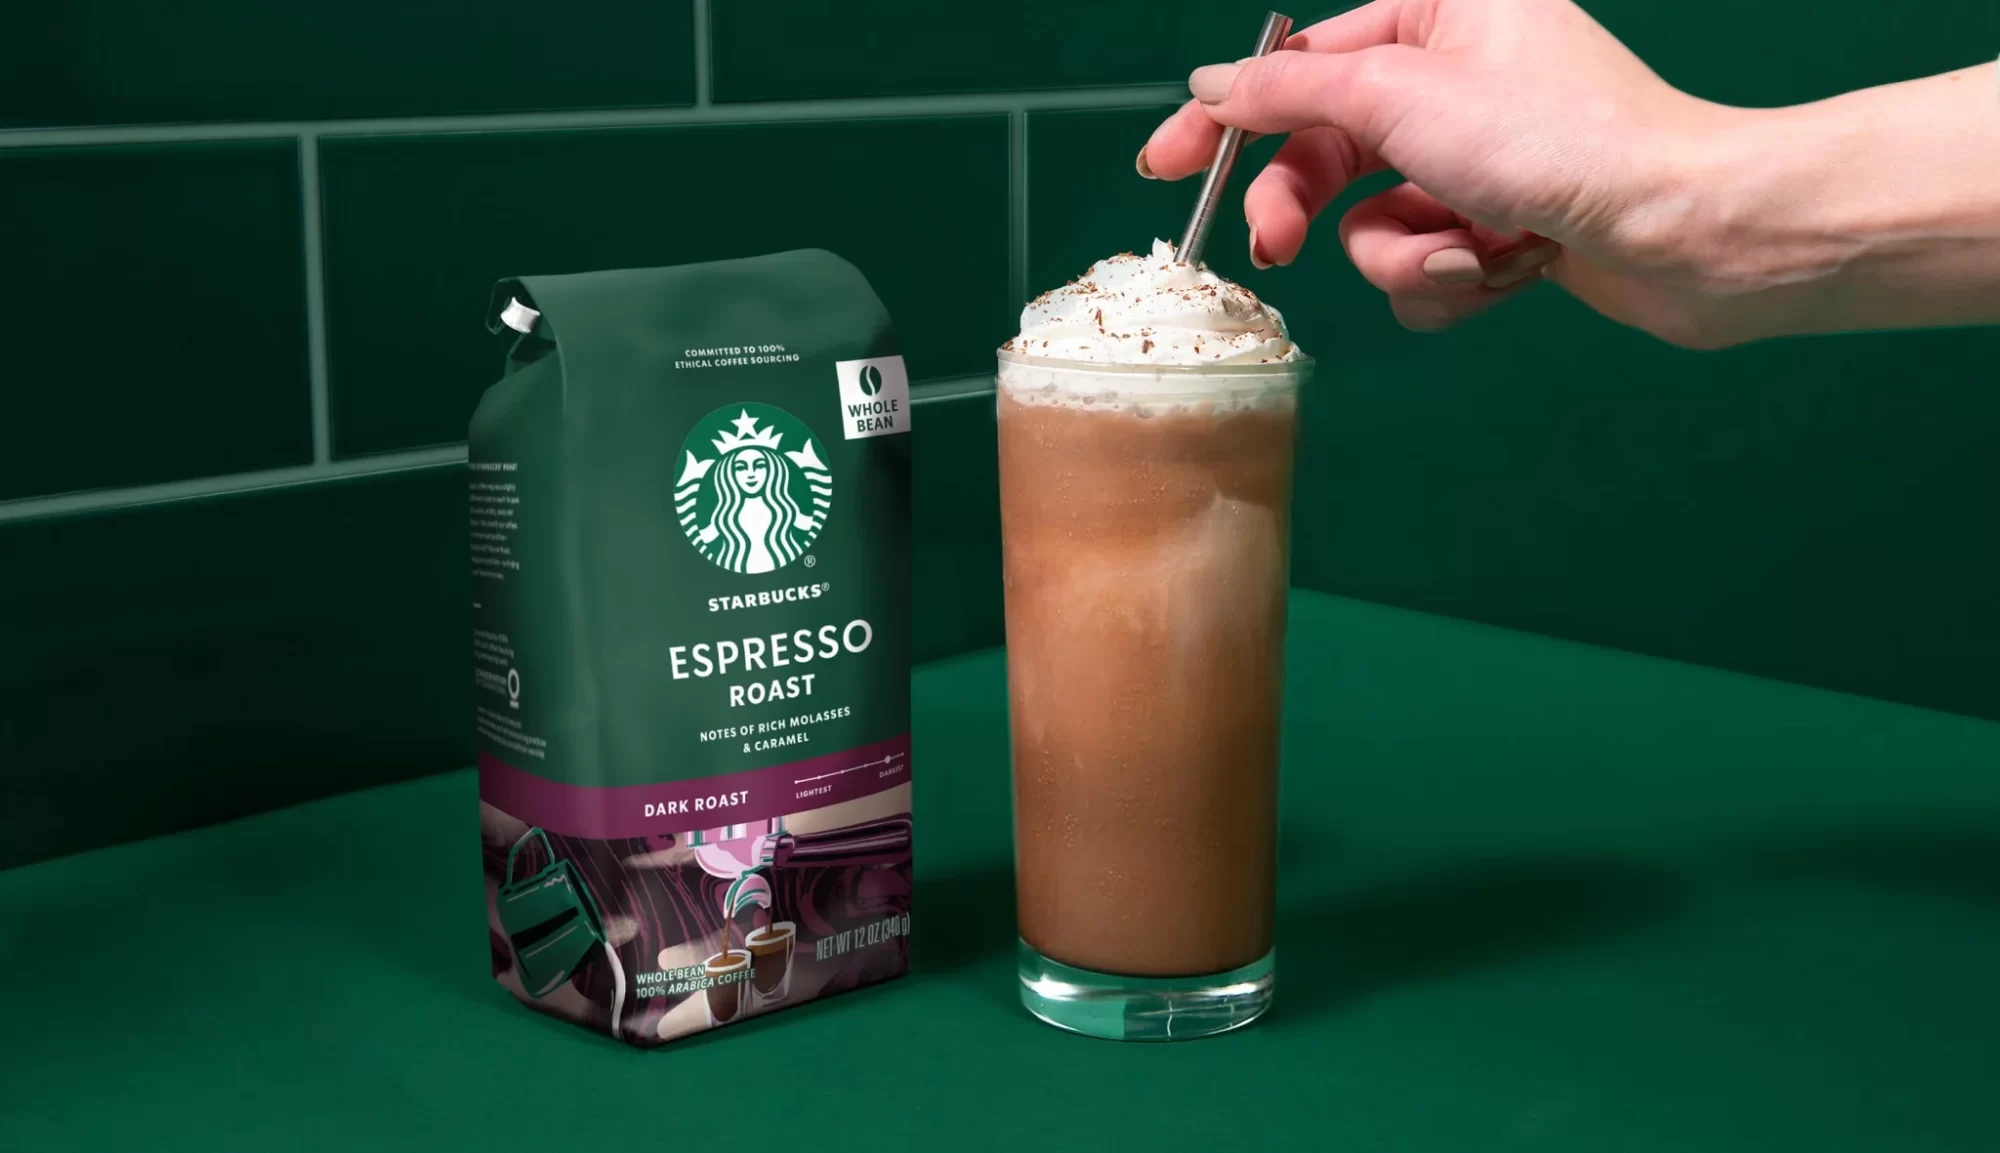 An easy to follow recipe for making a delicious cup of coffee with instructions on preparing the perfect blend using Starbucks coffee.